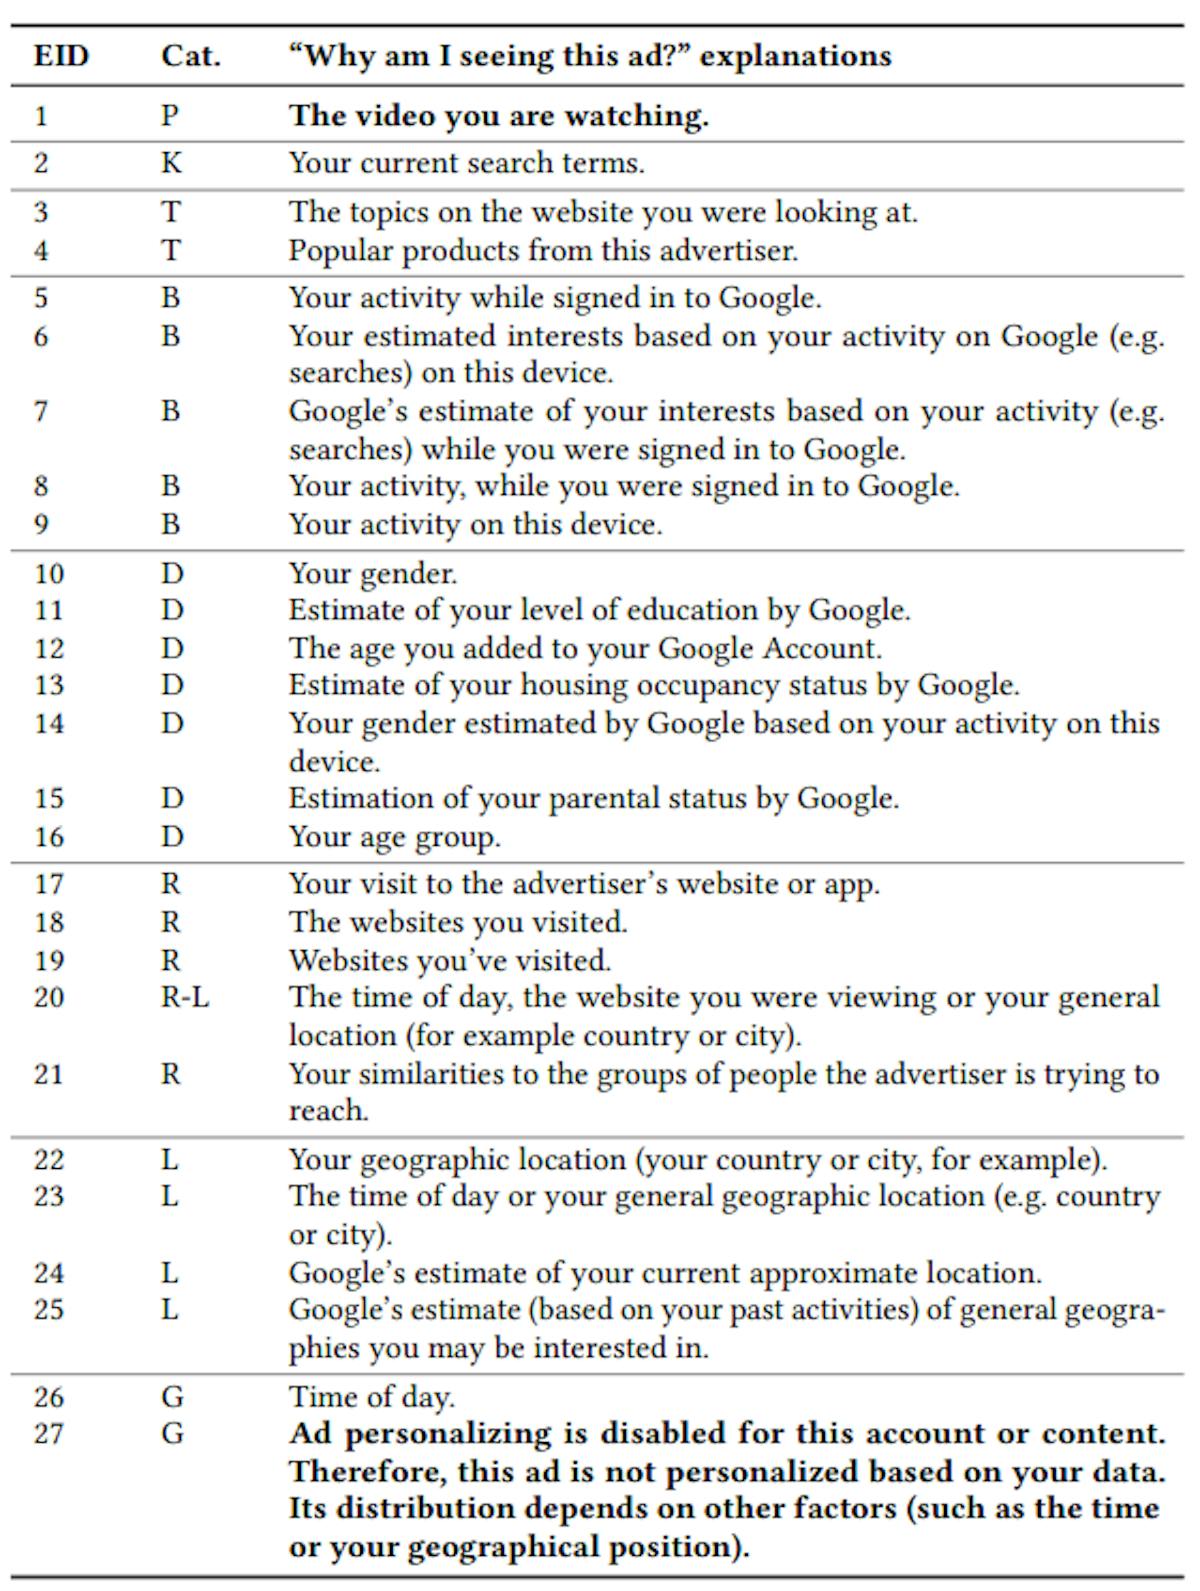 Table 4: List of the explanations why a user receives an ad. We group them into eight targeting categories: A placement based ads; R–Re-targeting ads; T–Theme-based ads; K– Keyword-based; D–Demographic-based; B–Behavioral orinterest-based; L–Location-based; G–General targeting. The grouping is made based on our intuition and not based on ad experiments with definite proof.